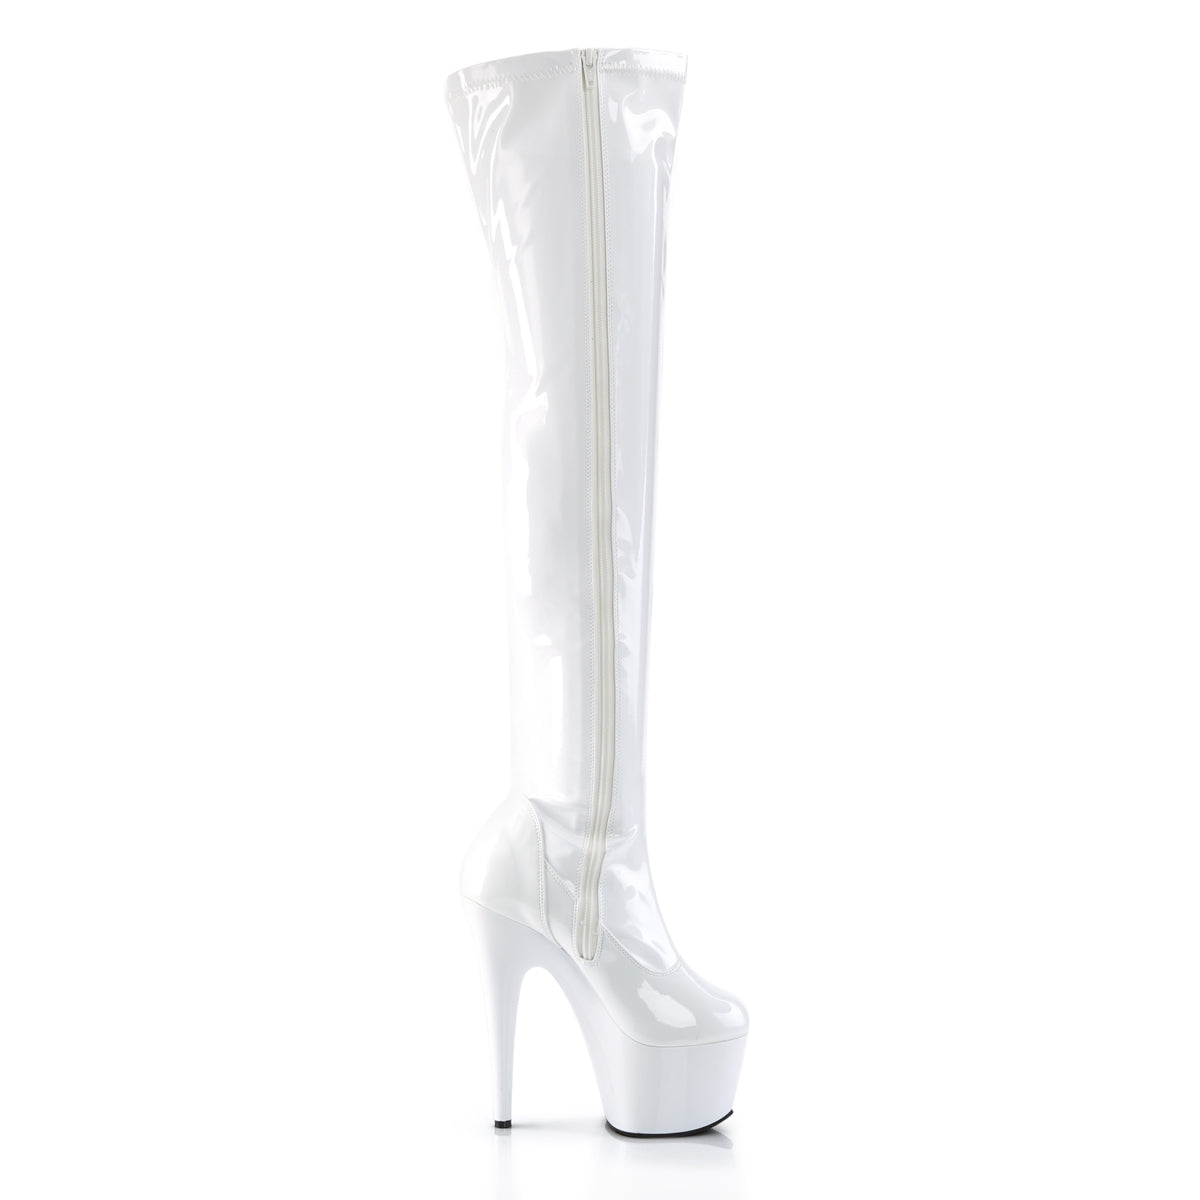 ADORE-3000 7 Inch Heel White Patent Pole Dancing Thigh Highs-Pleaser- Sexy Shoes Fetish Heels